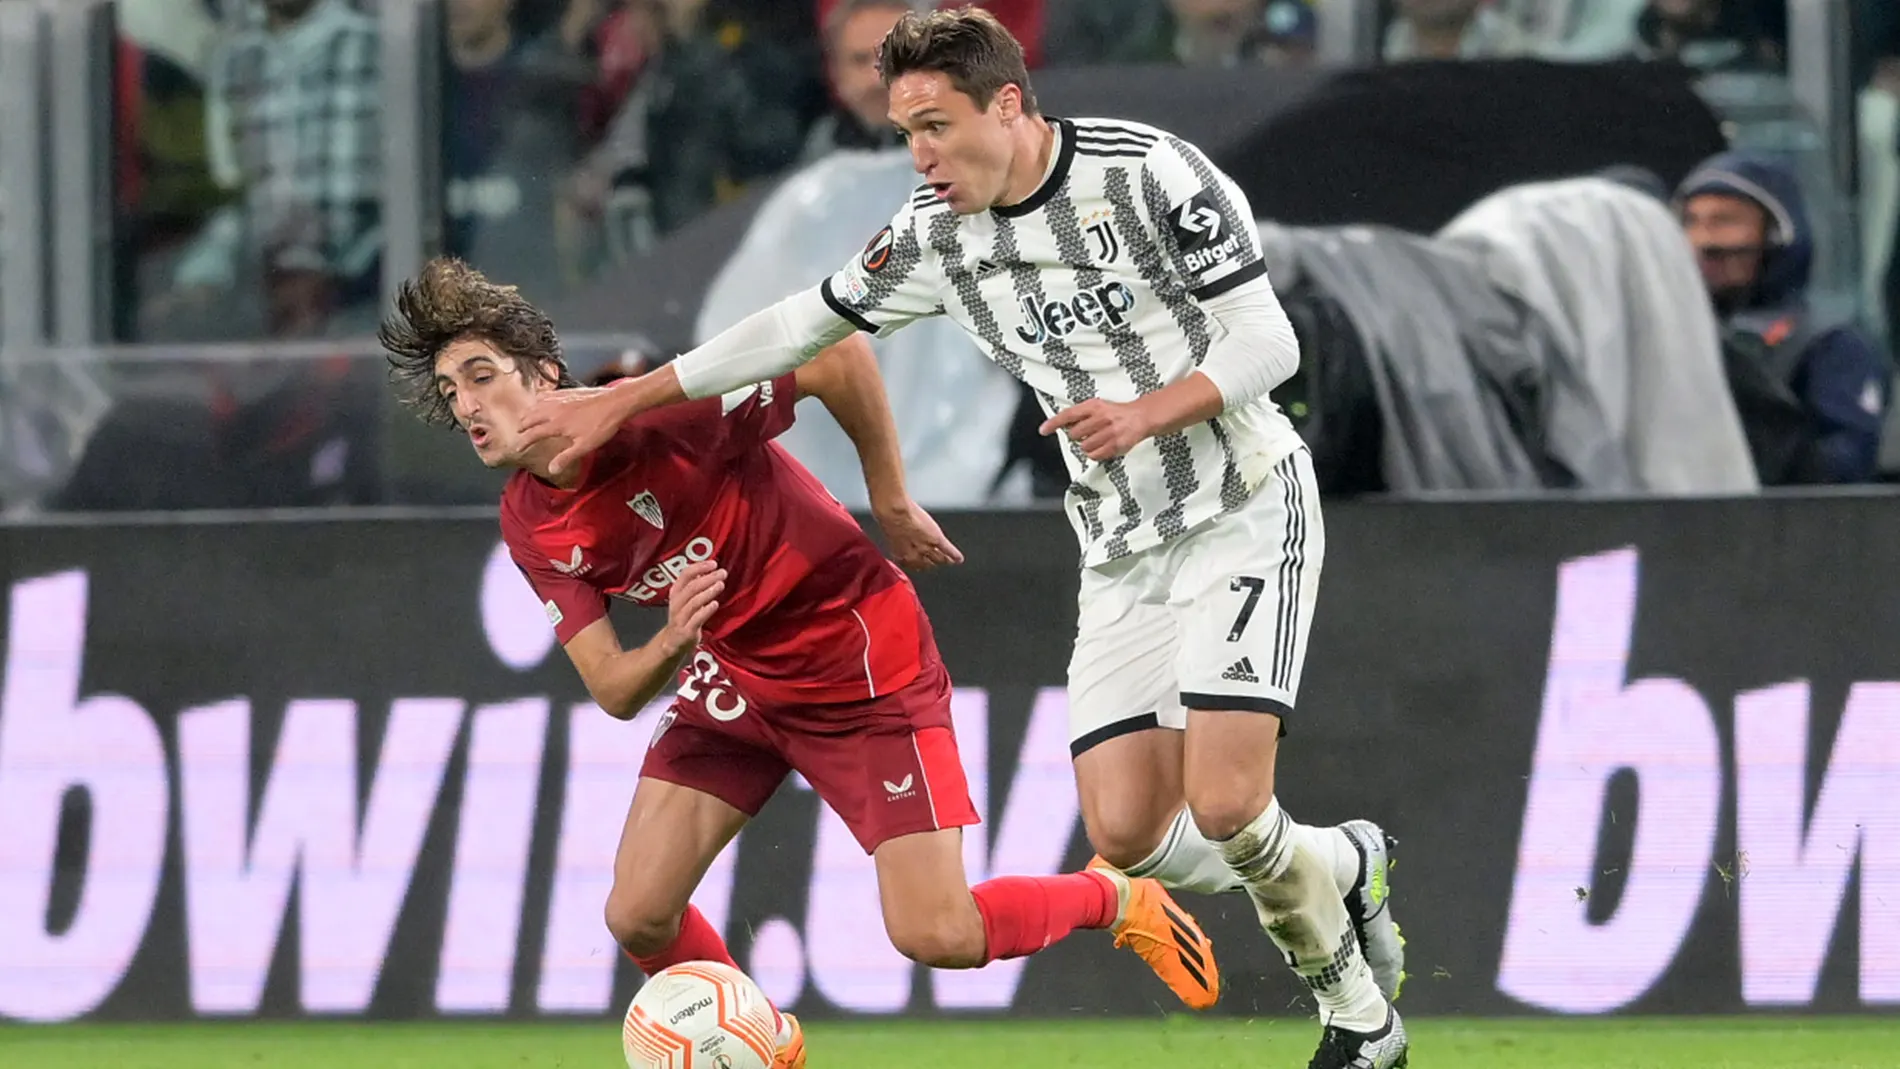 11 May 2023, Spain, Turin: Juventus' Federico Chiesa and Sevilla's Bryan Gil battle for the ball during the UEFA Europa League semi final first leg soccer match between Juventus vs Sevilla at the Allianz Stadium. Photo: Tano Pecoraro/LaPresse via ZUMA Press/dpaTano Pecoraro/Lapresse Via Zuma / Dpa11/05/2023 ONLY FOR USE IN SPAIN